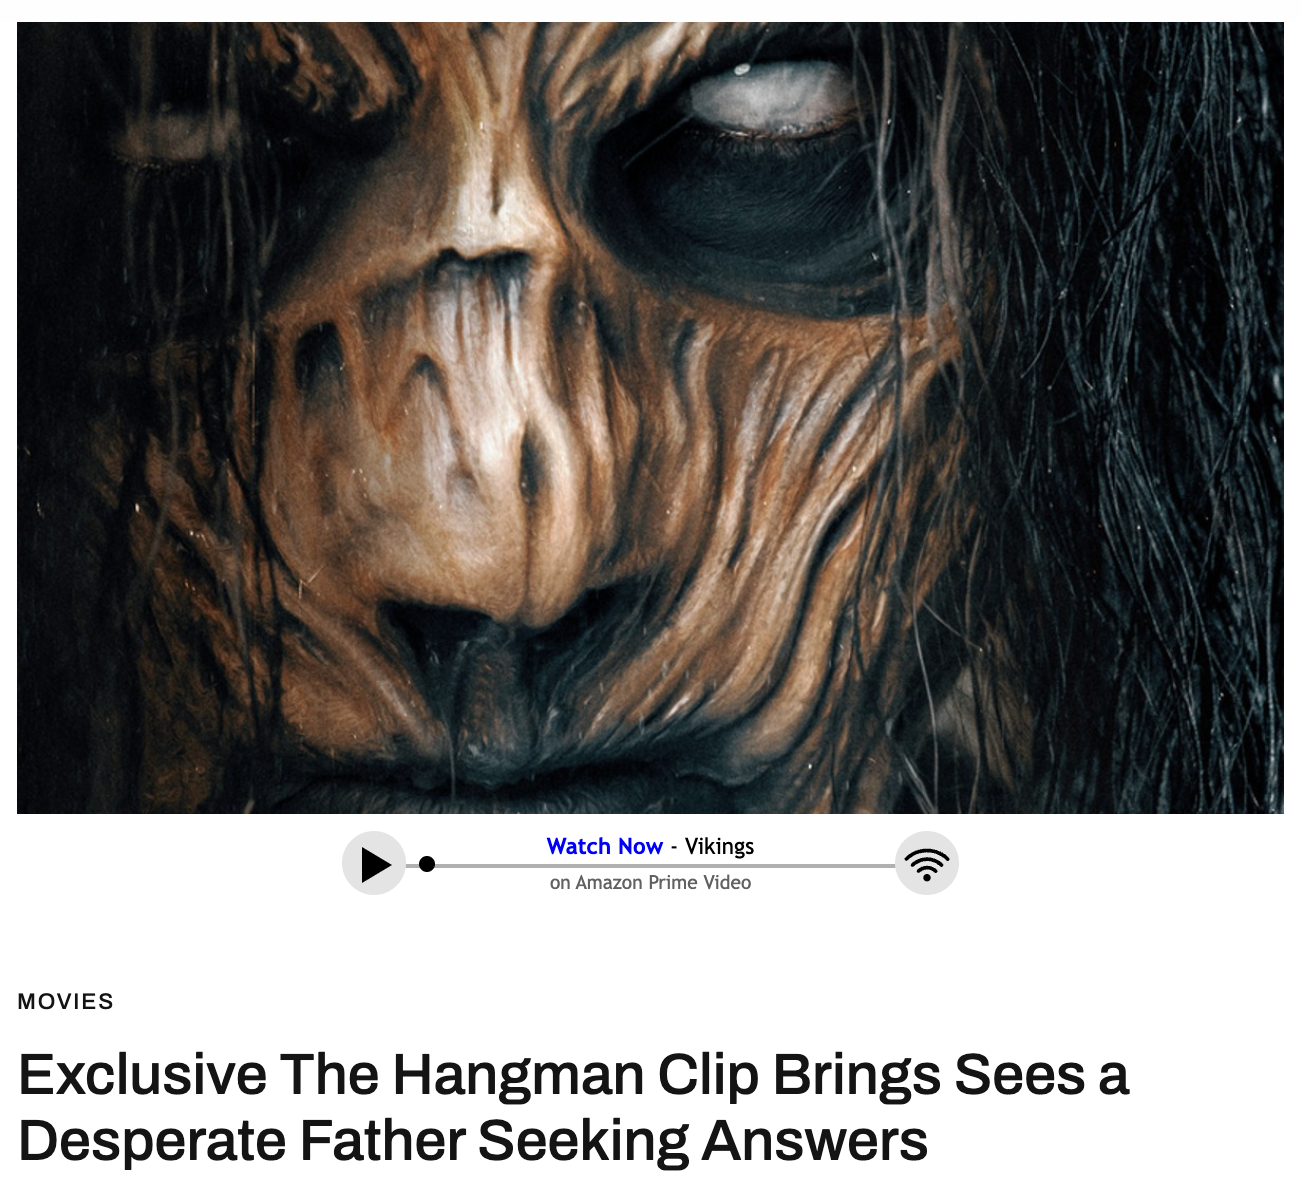 Exclusive The Hangman Clip Brings Sees a Desperate Father Seeking Answers